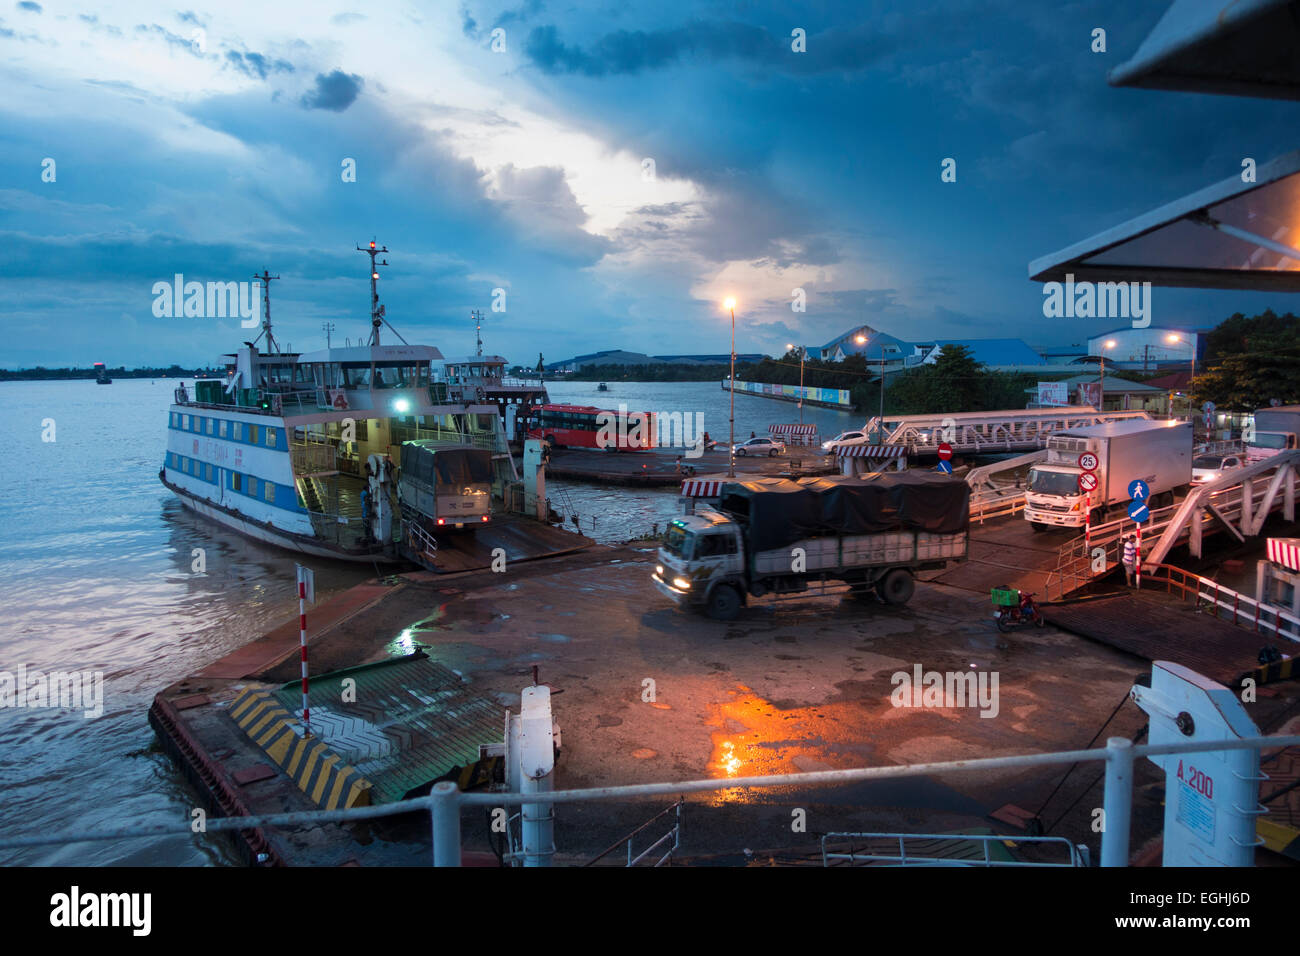 Car ferry on the Mekong River, Vietnam Stock Photo